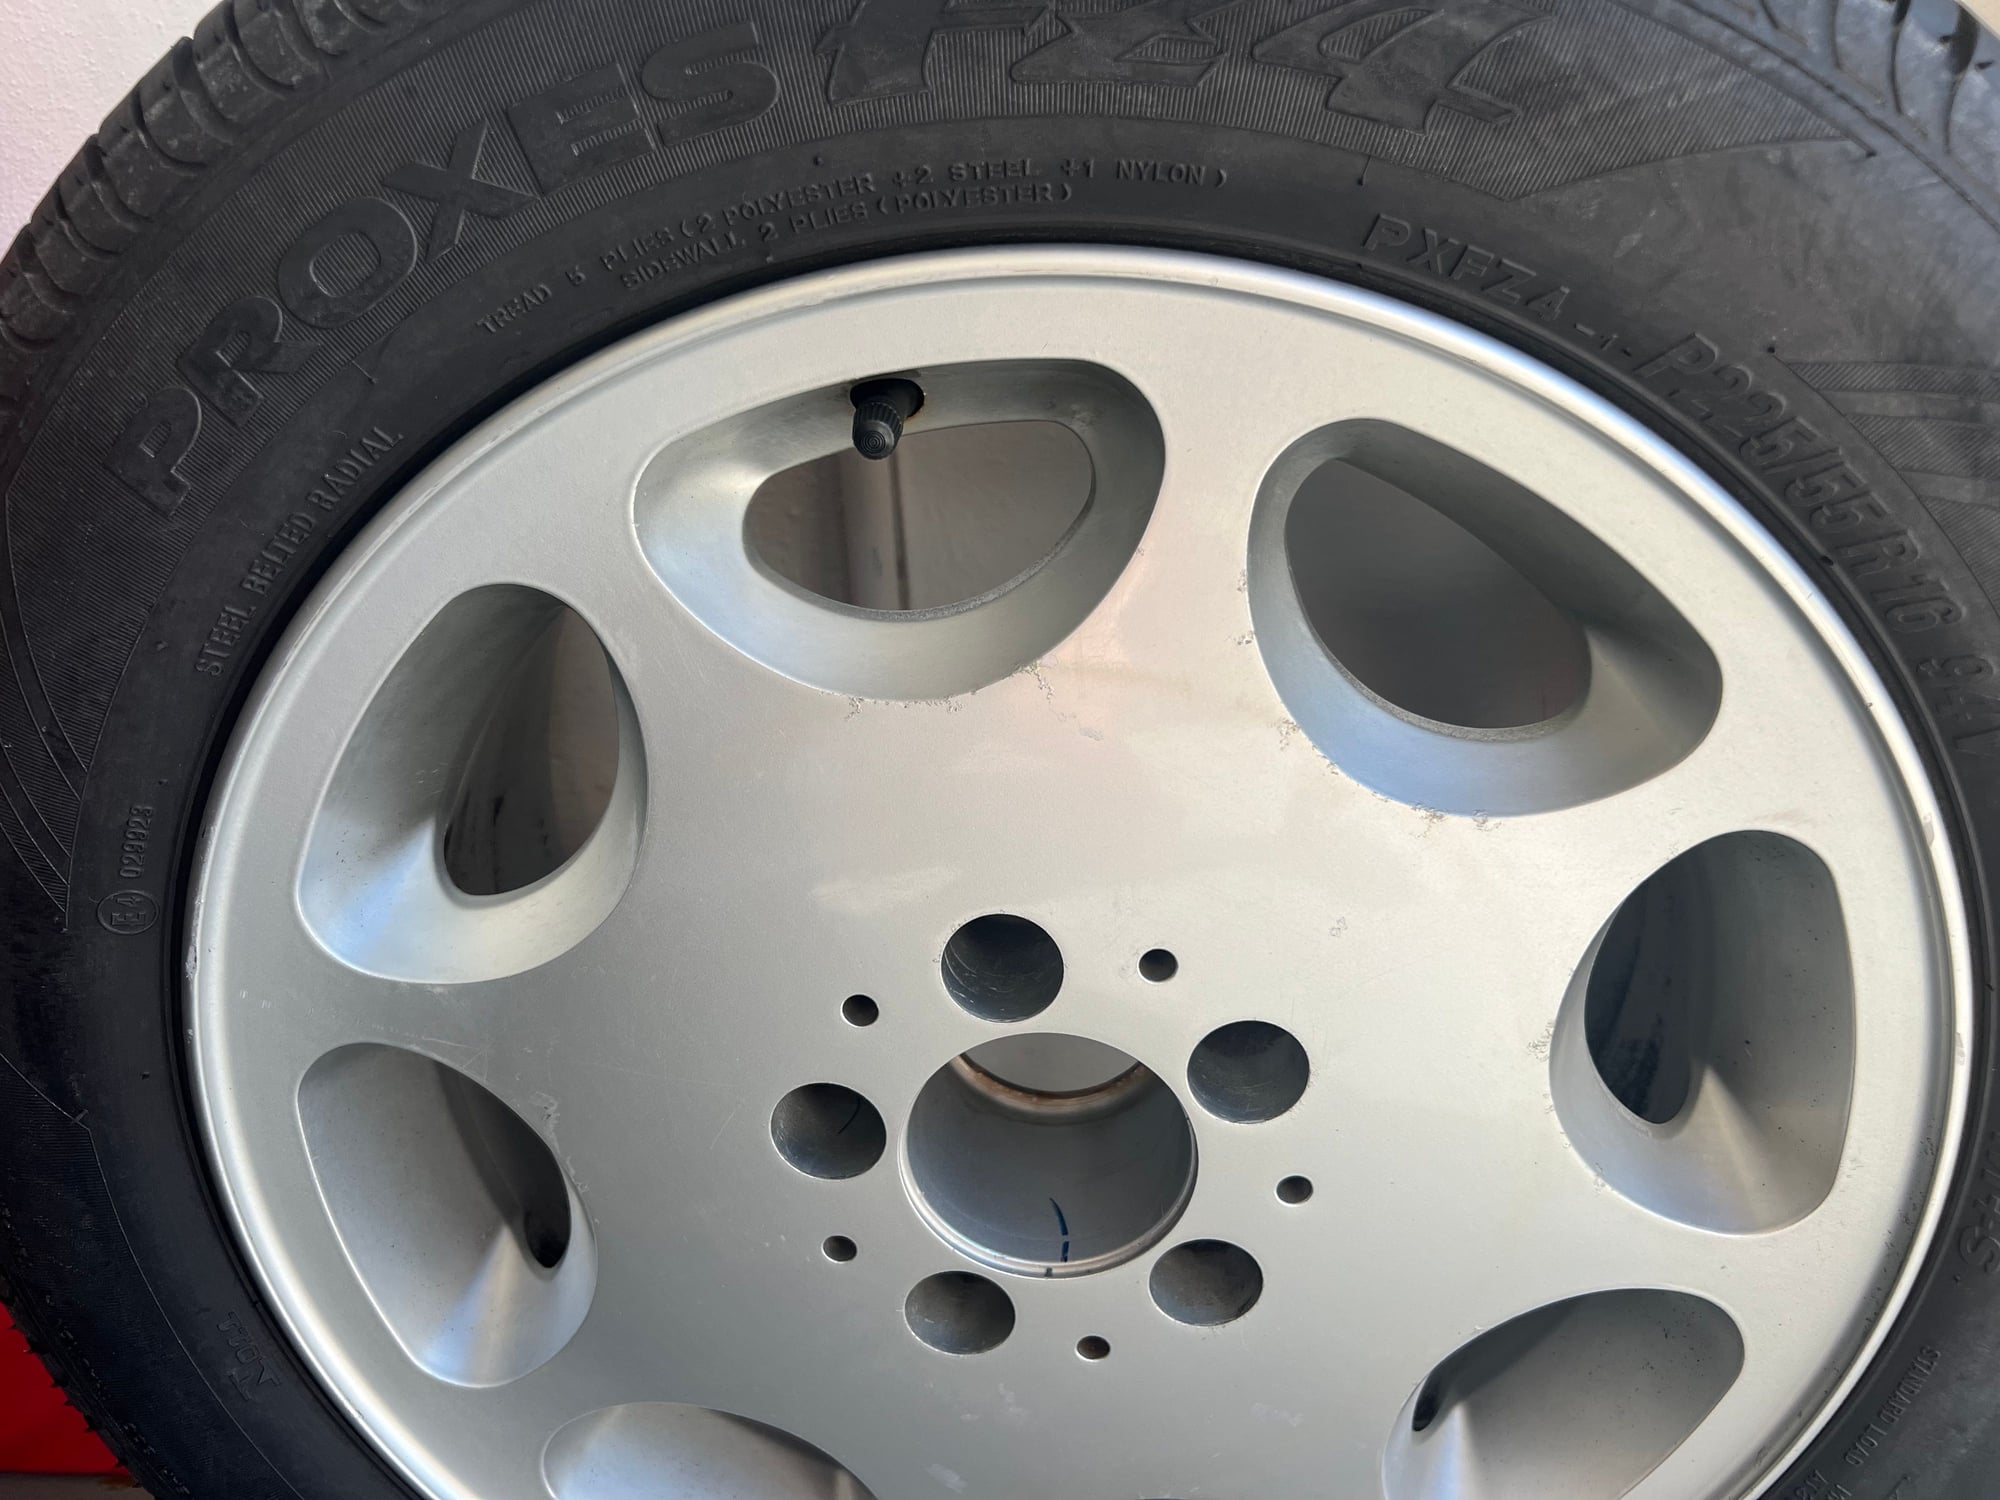 Wheels and Tires/Axles - MB OEM CODE 652 8-HOLE LIGHT ALLOY WHEEL & BRAND NEW TOYO PROXES FZ4 P225/55/R16 - Used - Doral, FL 33178, United States